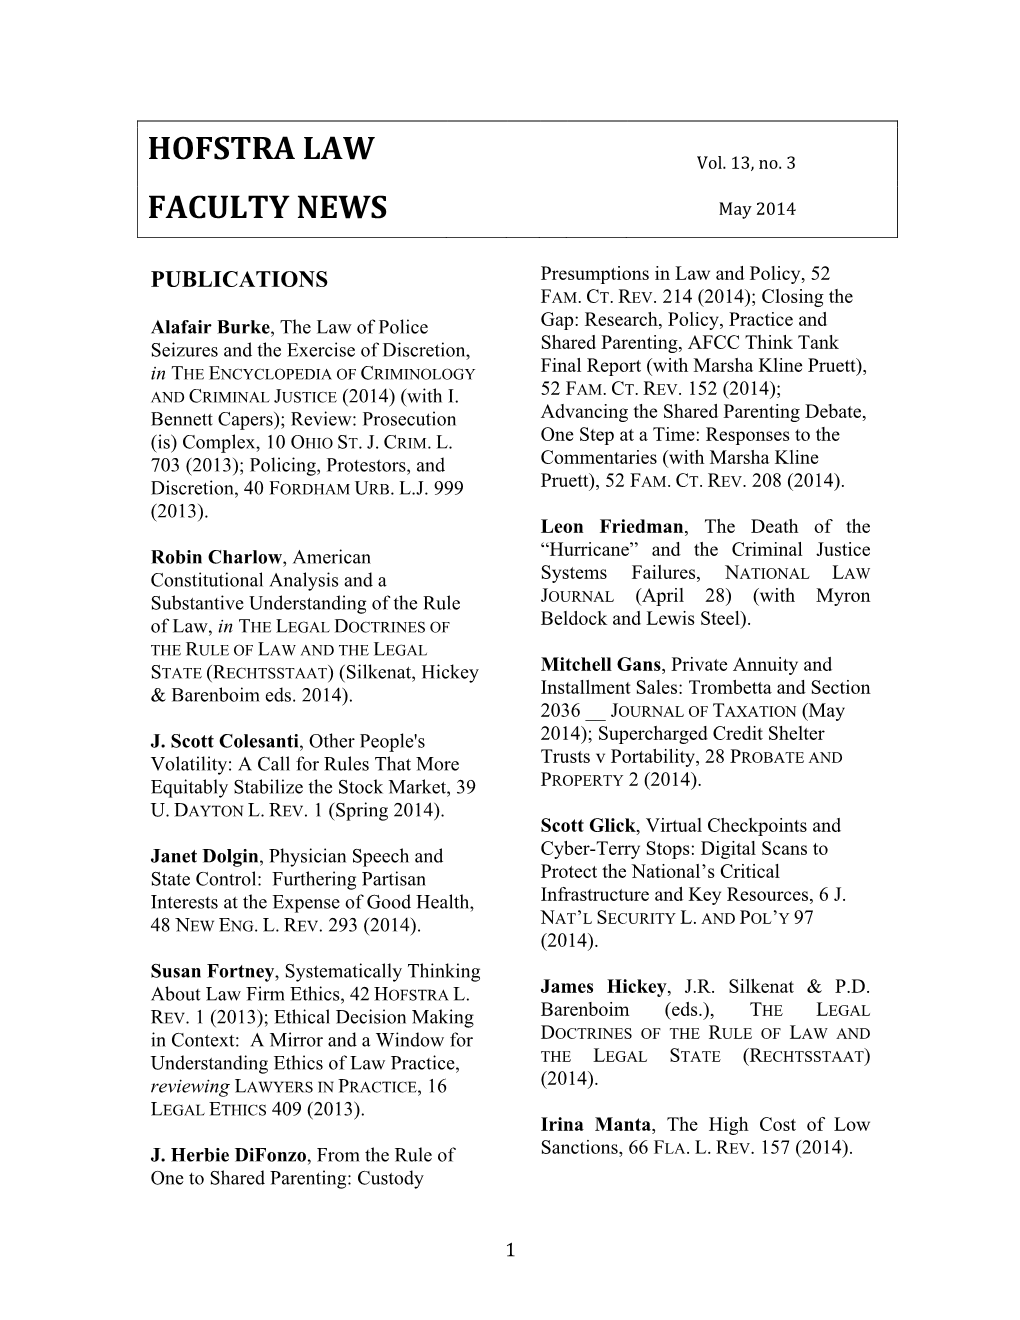 Faculty Newsletter Vol 13 No 3